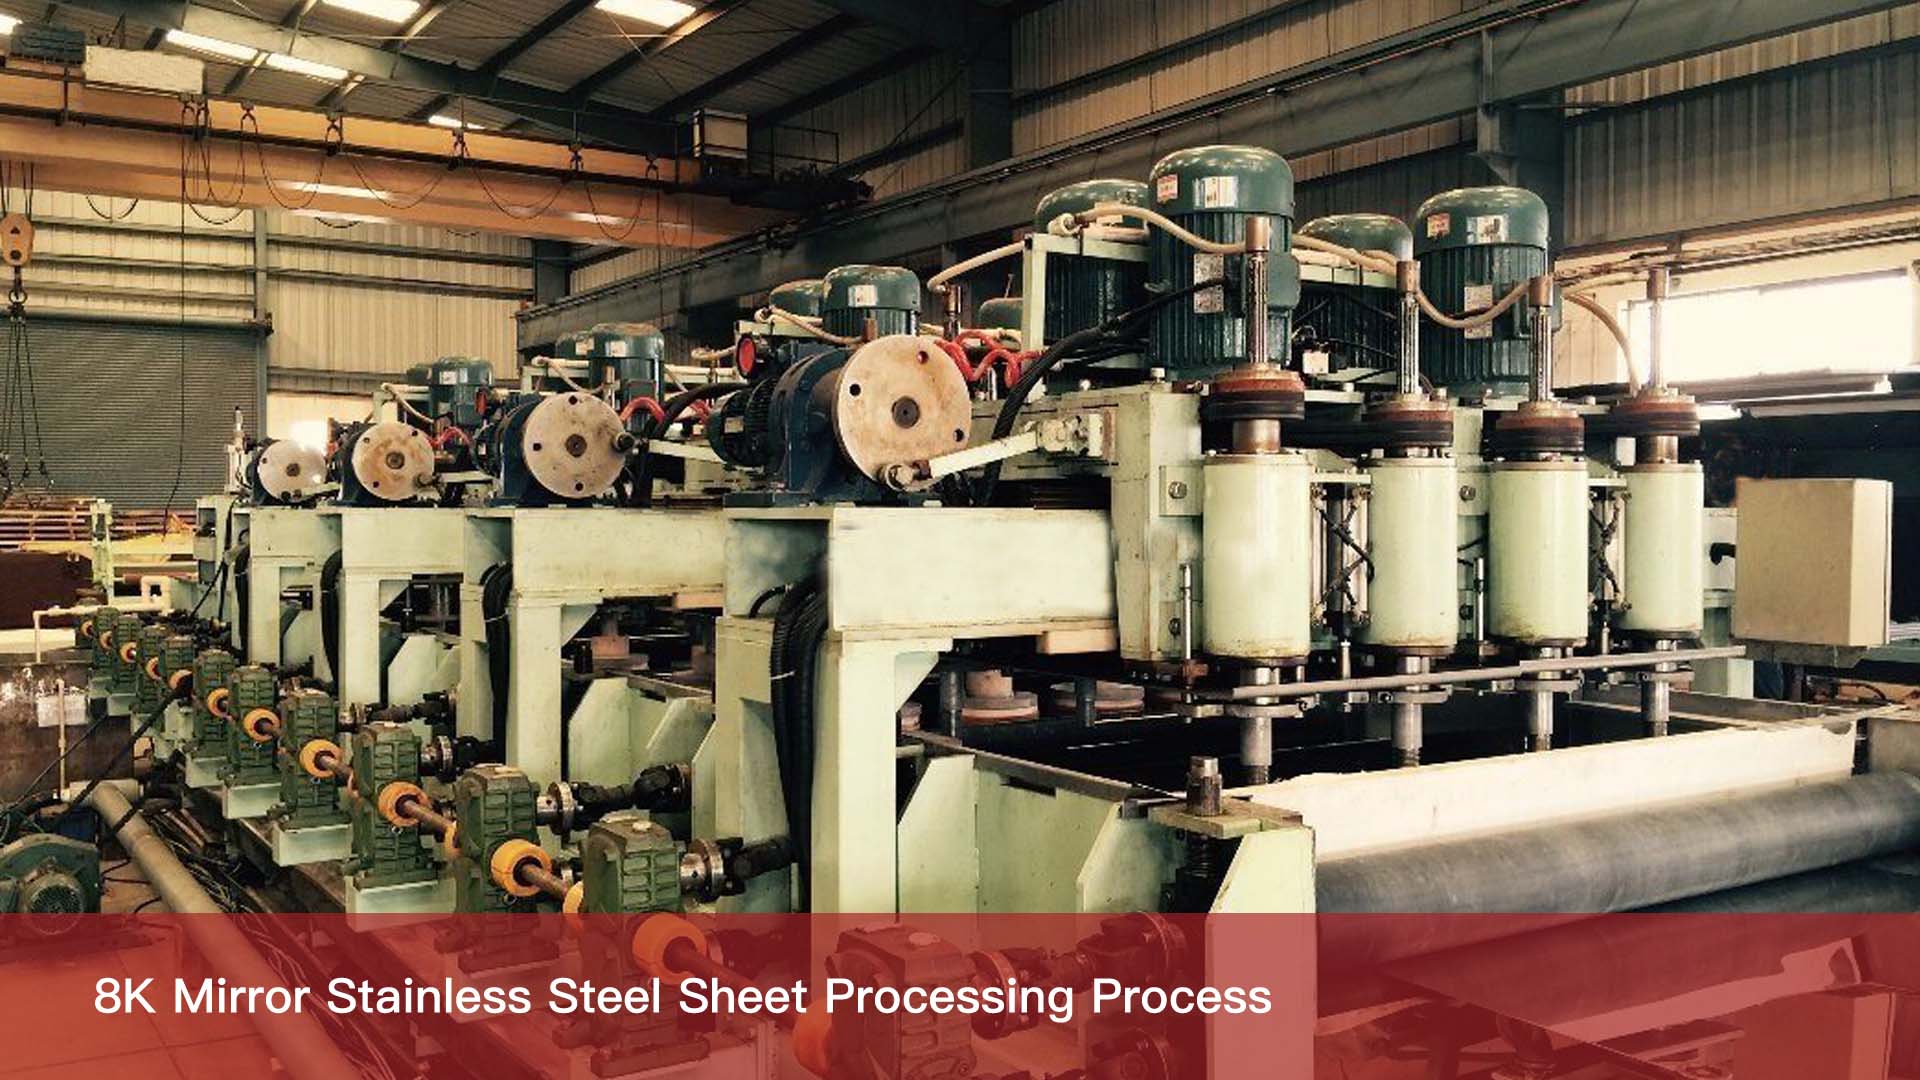 8K Mirror Stainless Steel Sheet Processing Process